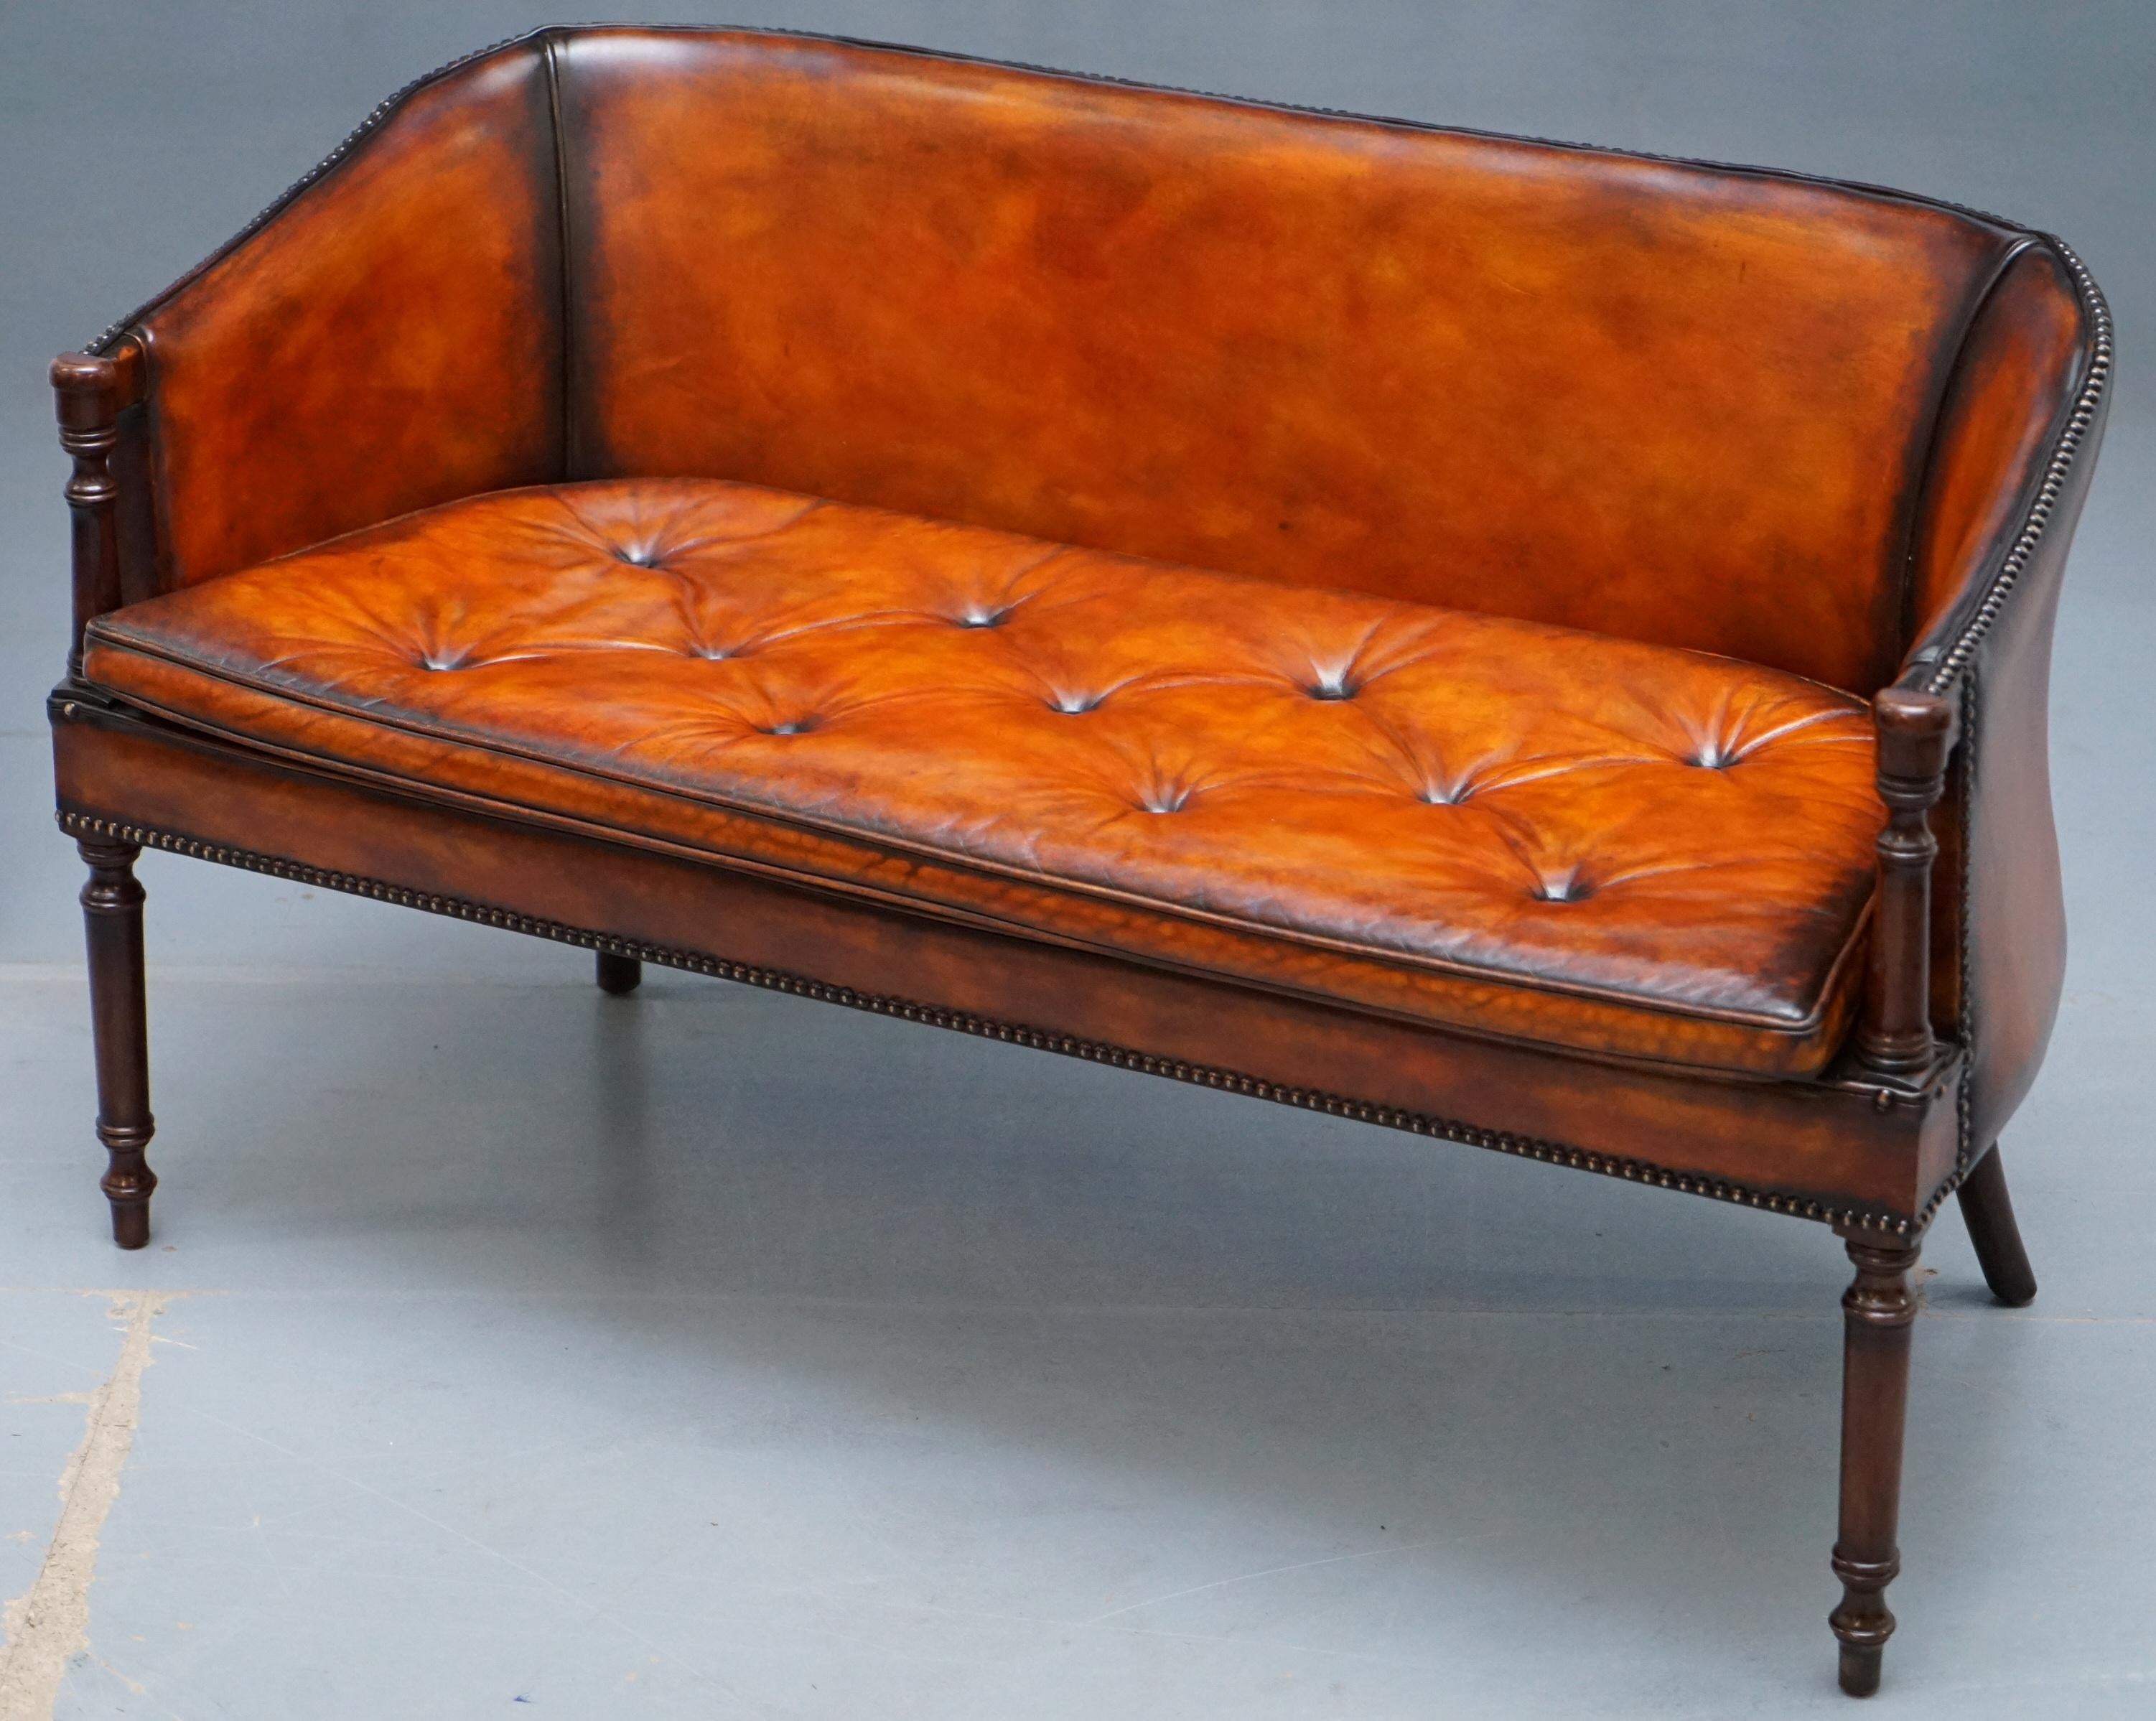 We delighted to offer for sale this stunning Regency style fully restored small settee bench sofa with double sided Chesterfield buttoned cushion

A very good looking and well made antique piece, the sofa has been fully restored, the leather had